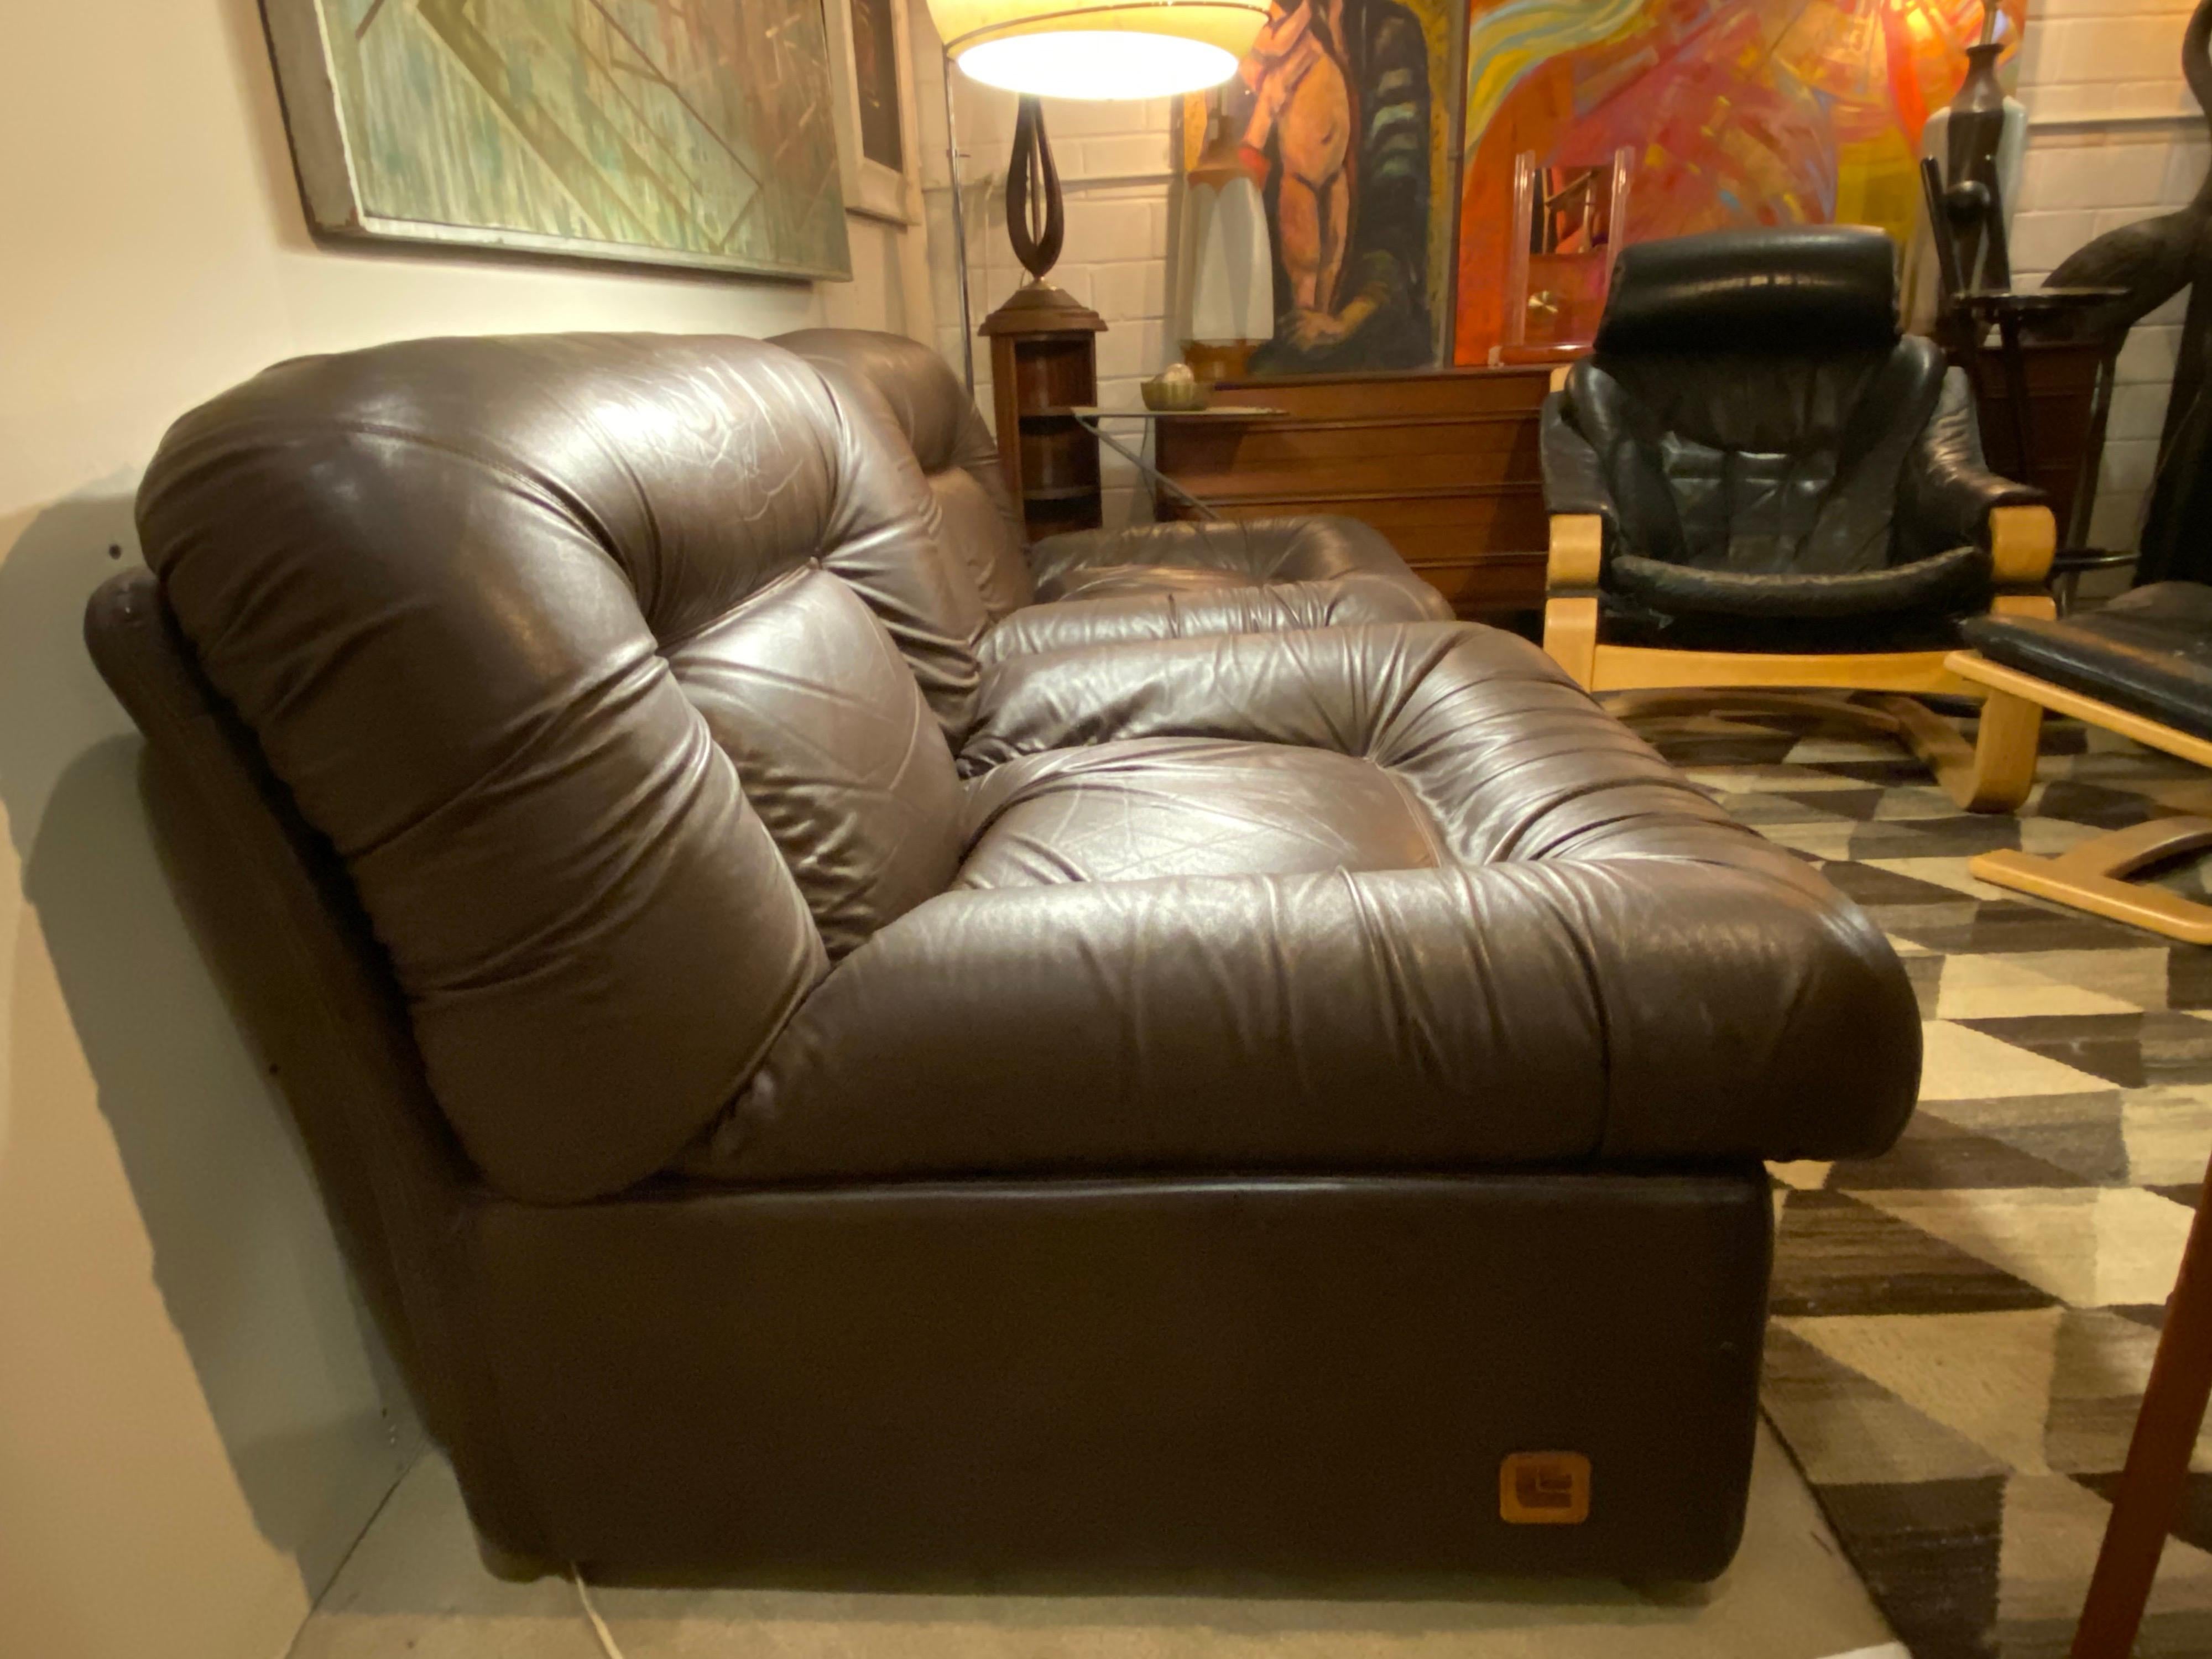 Beautiful pair of Italian Mid-Century Modern lounge chairs made by Lev & Lev is made of leather, very comfortable, and in great vintage condition.